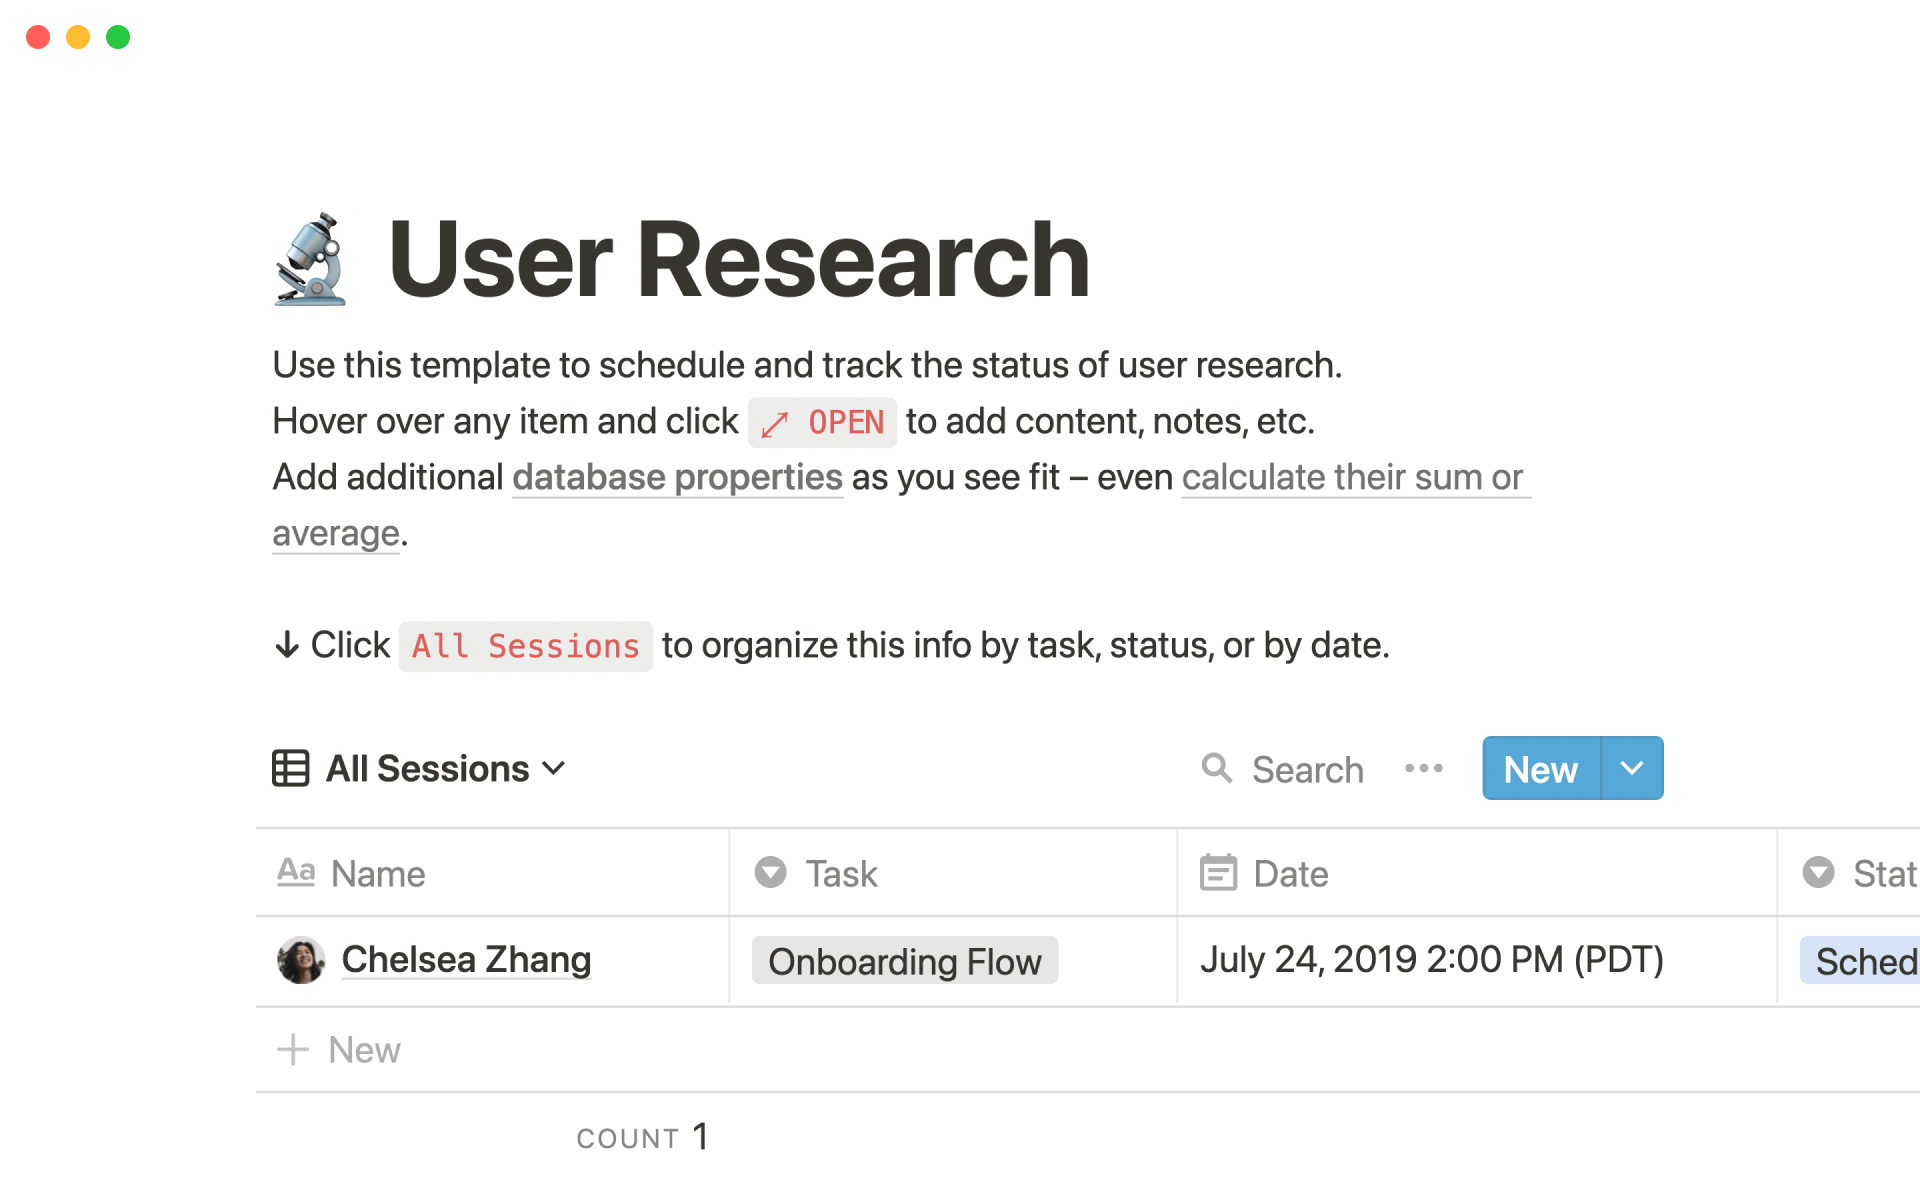 The desktop image for the User research template